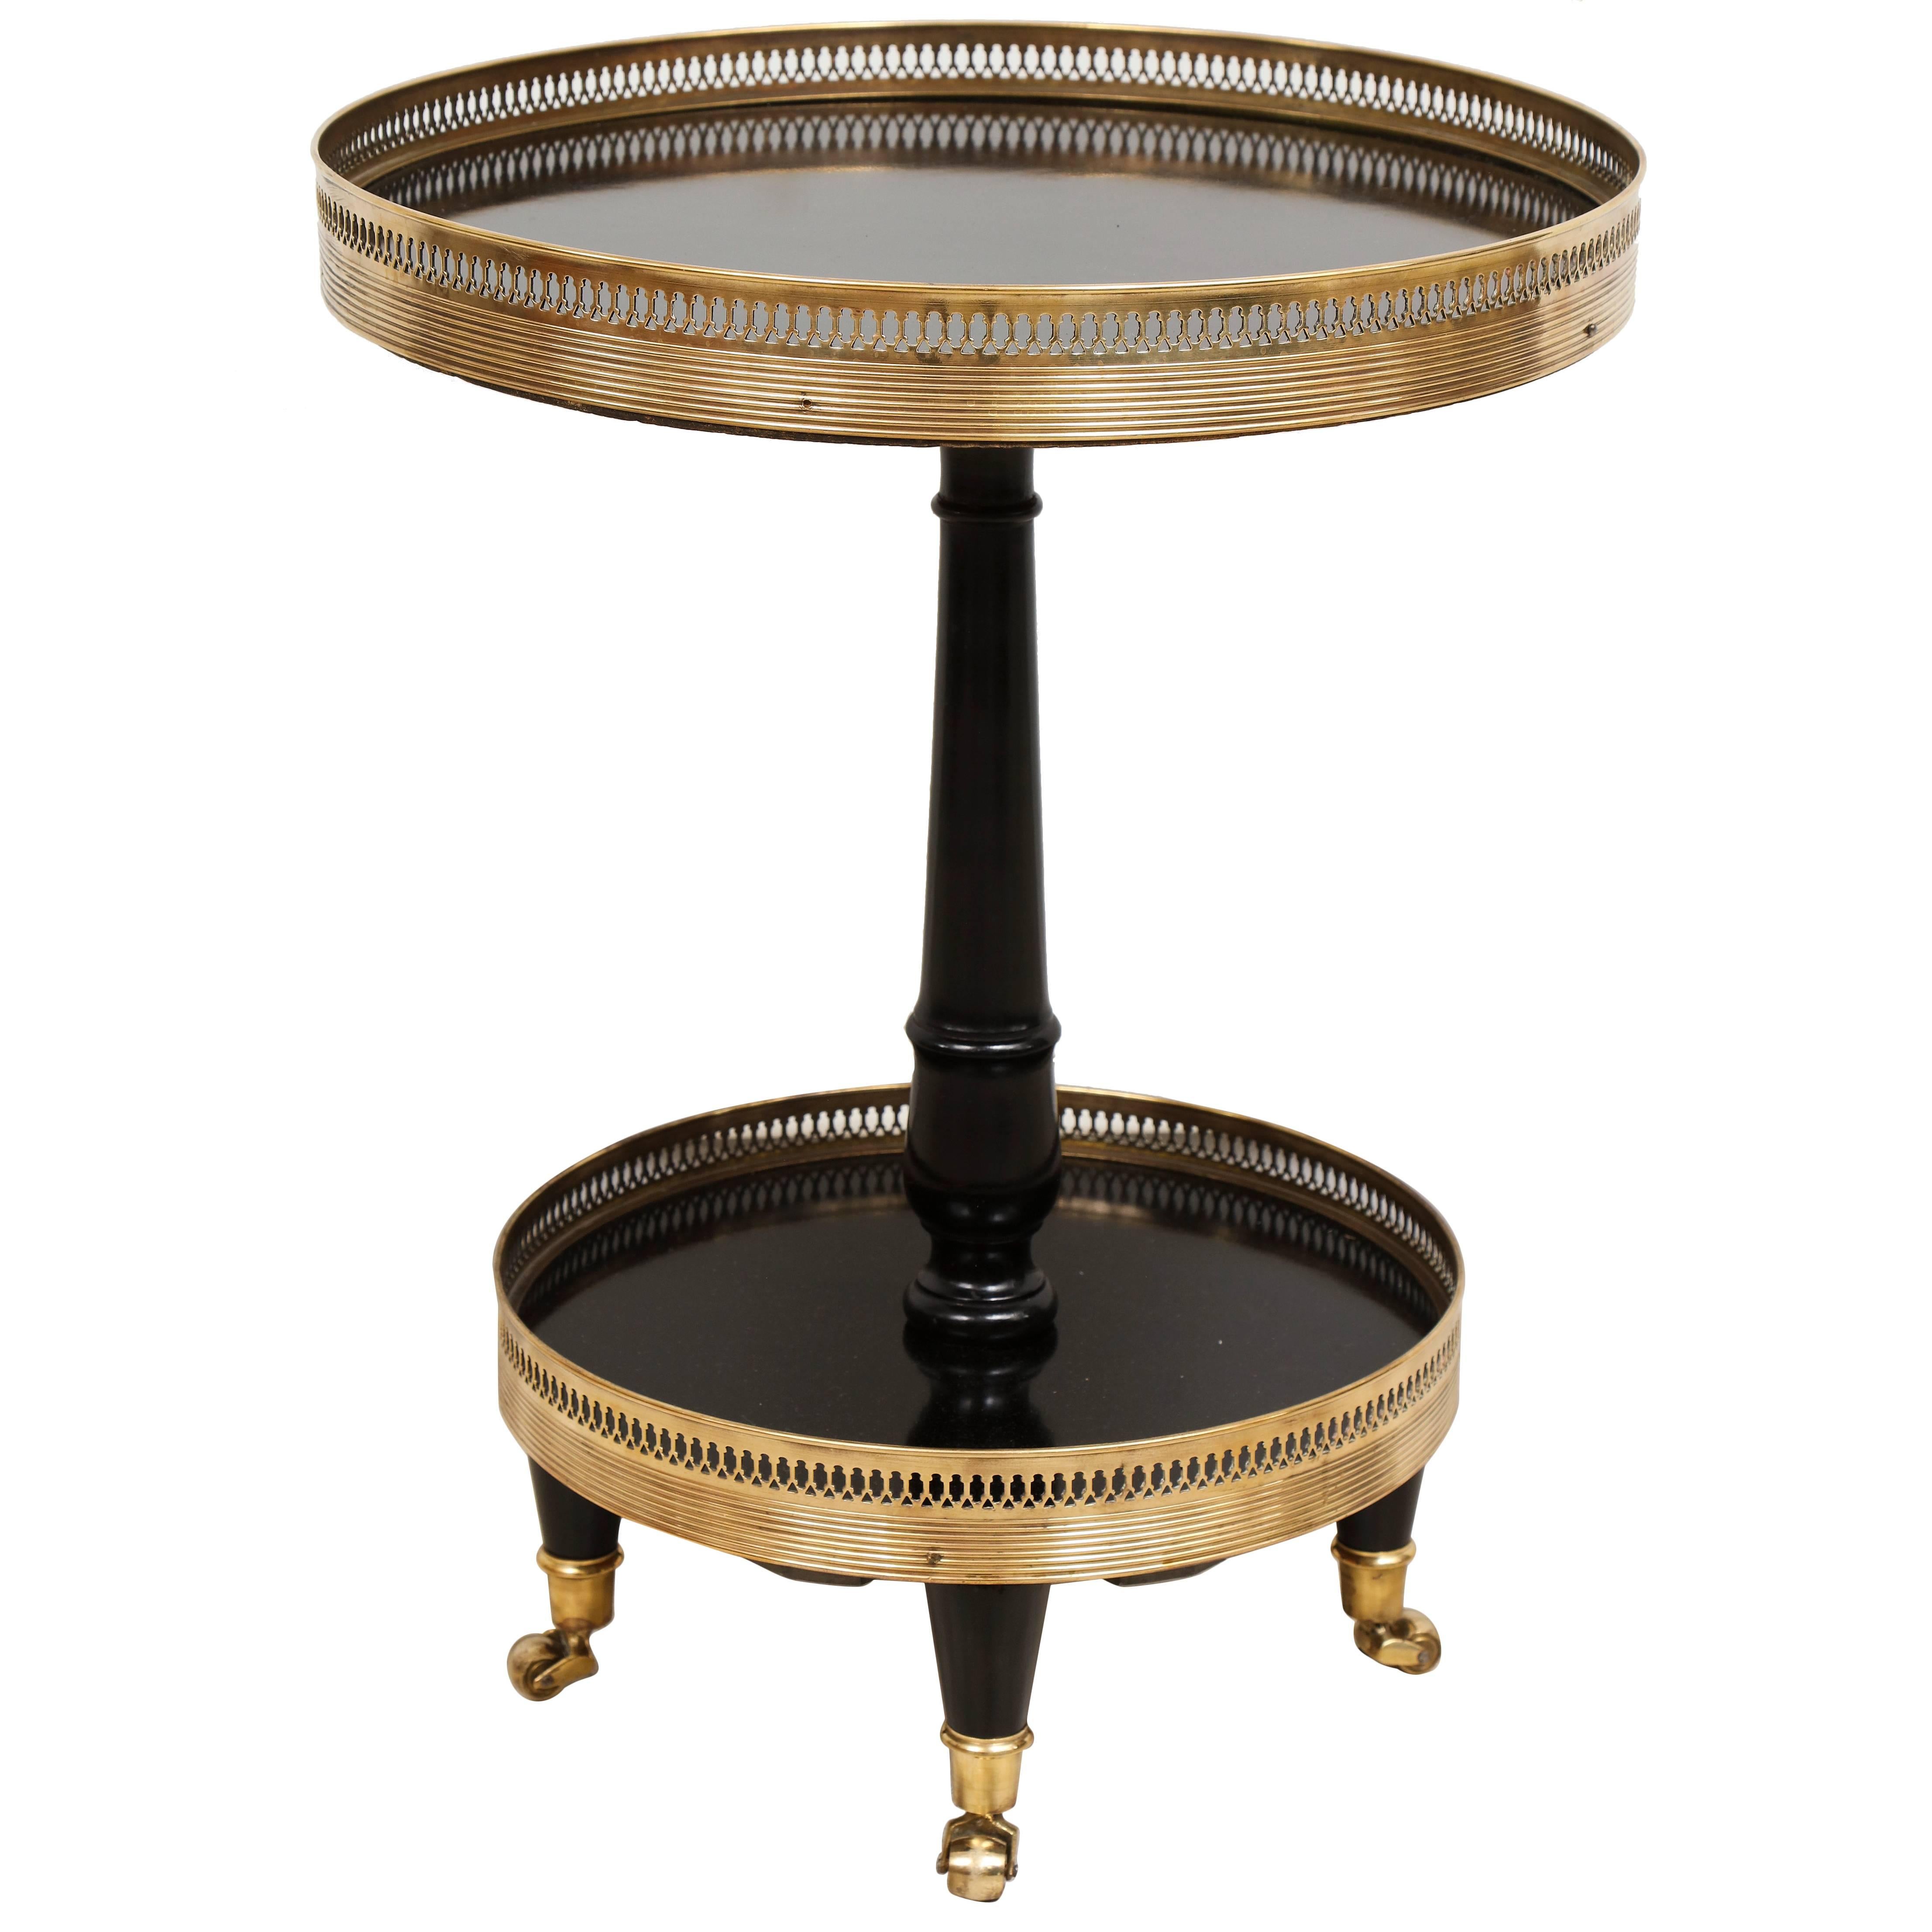 Regency Style End Table with Brass Gallery on Brass Sabots